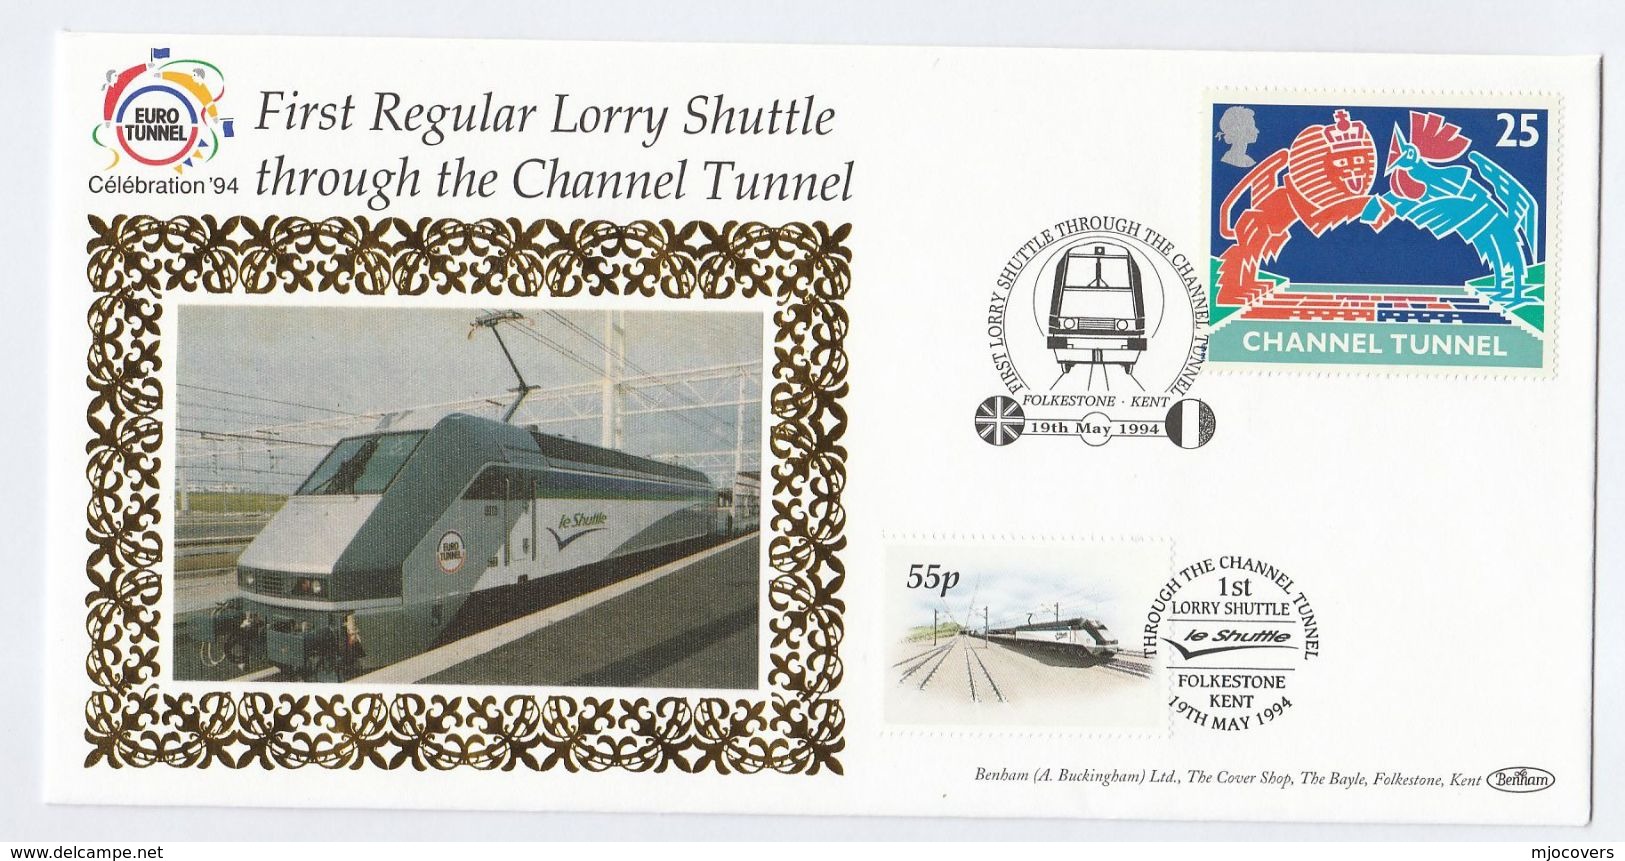 1994 Eurostar TRAIN CARRIED 1st LORRY SHUTTLE Service CHANNEL TUNNEL Railway FOLKESTONE GB Cover Stamps Event - Trains